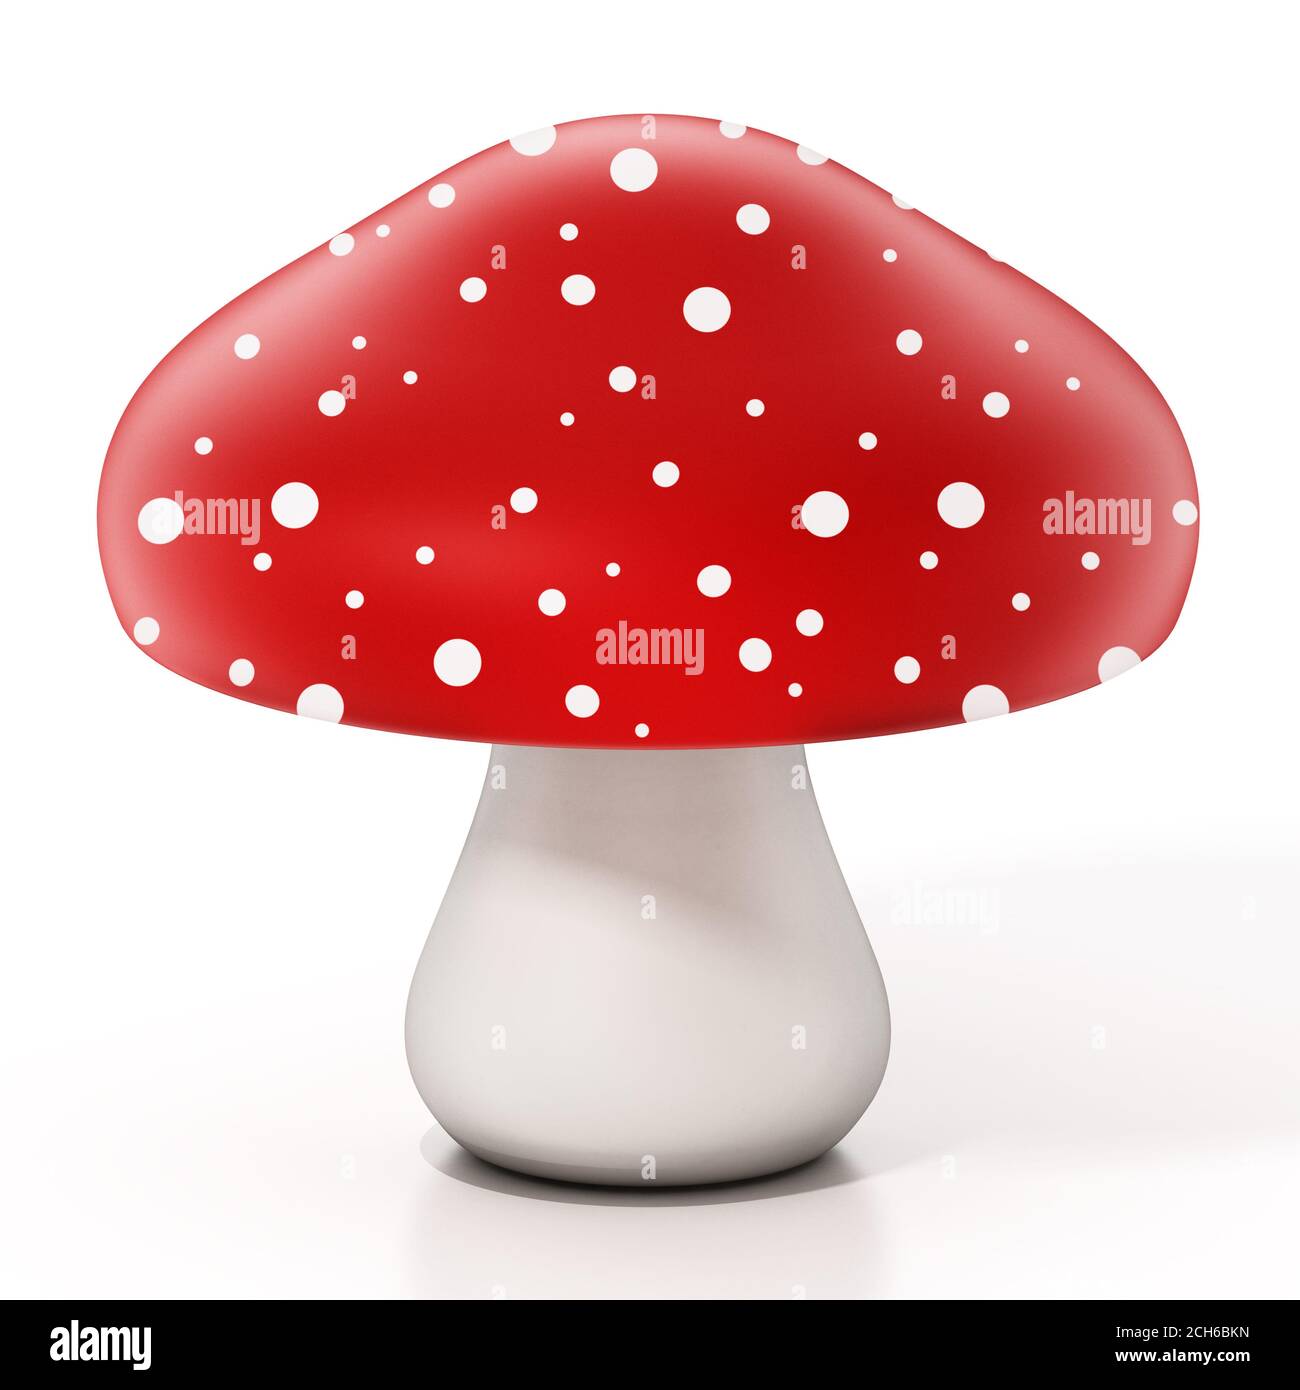 Red and white wild mushroom isolated on white background. 3D illustration. Stock Photo